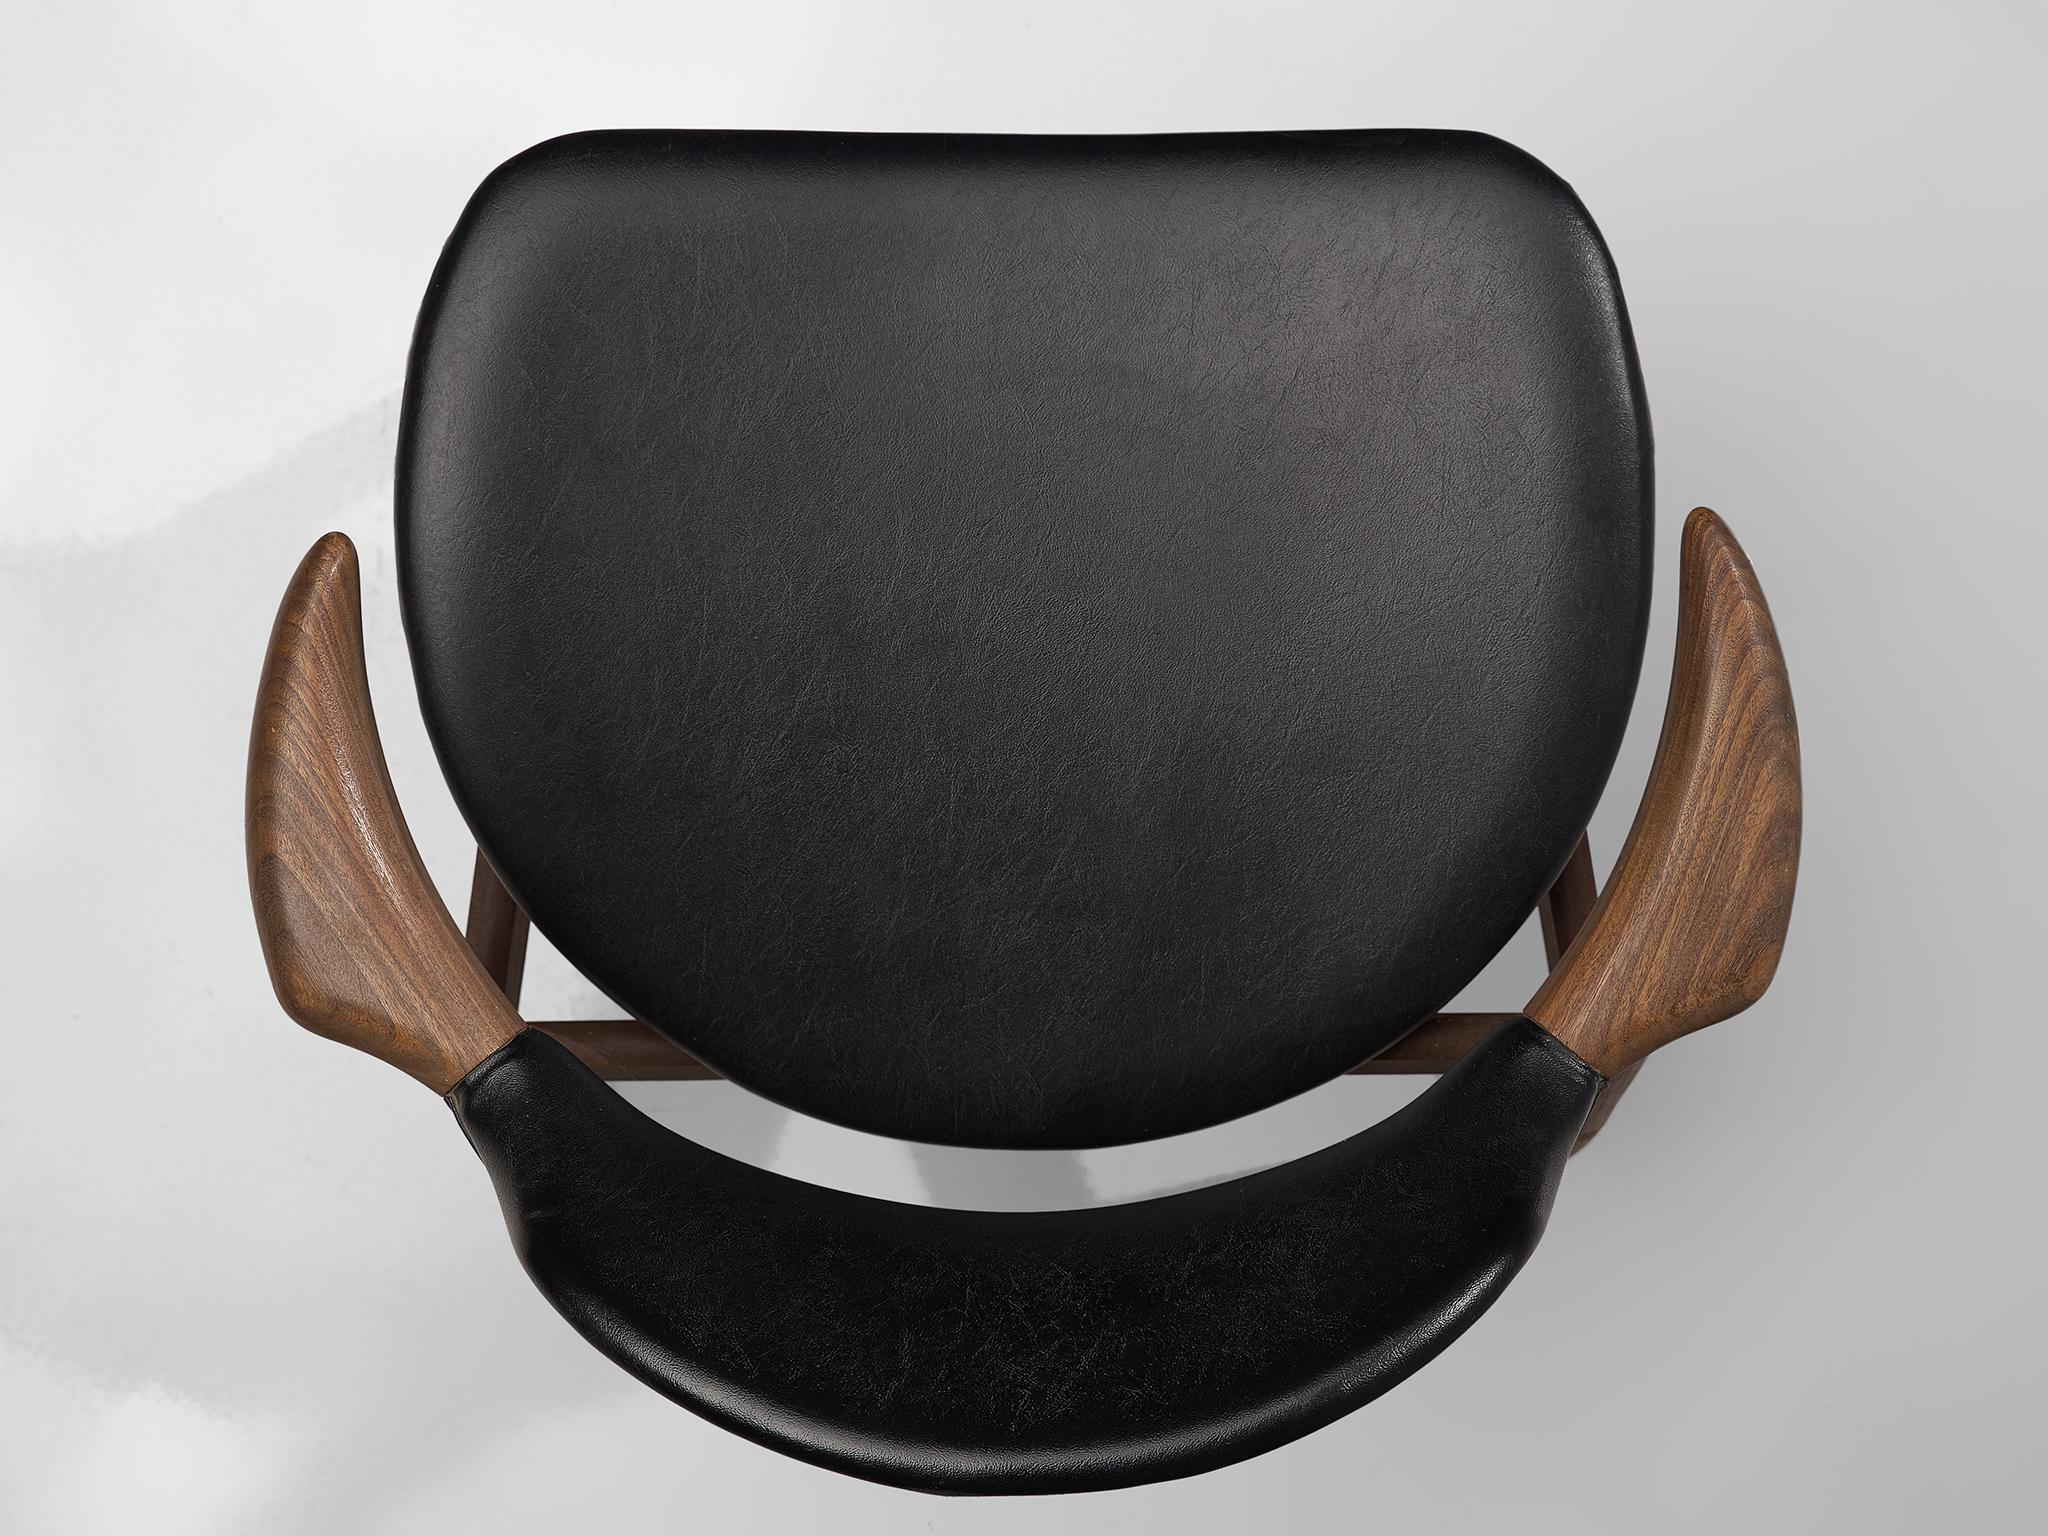 Large Set of Ten Bullhorn Chairs in Teak and Black Leather 1